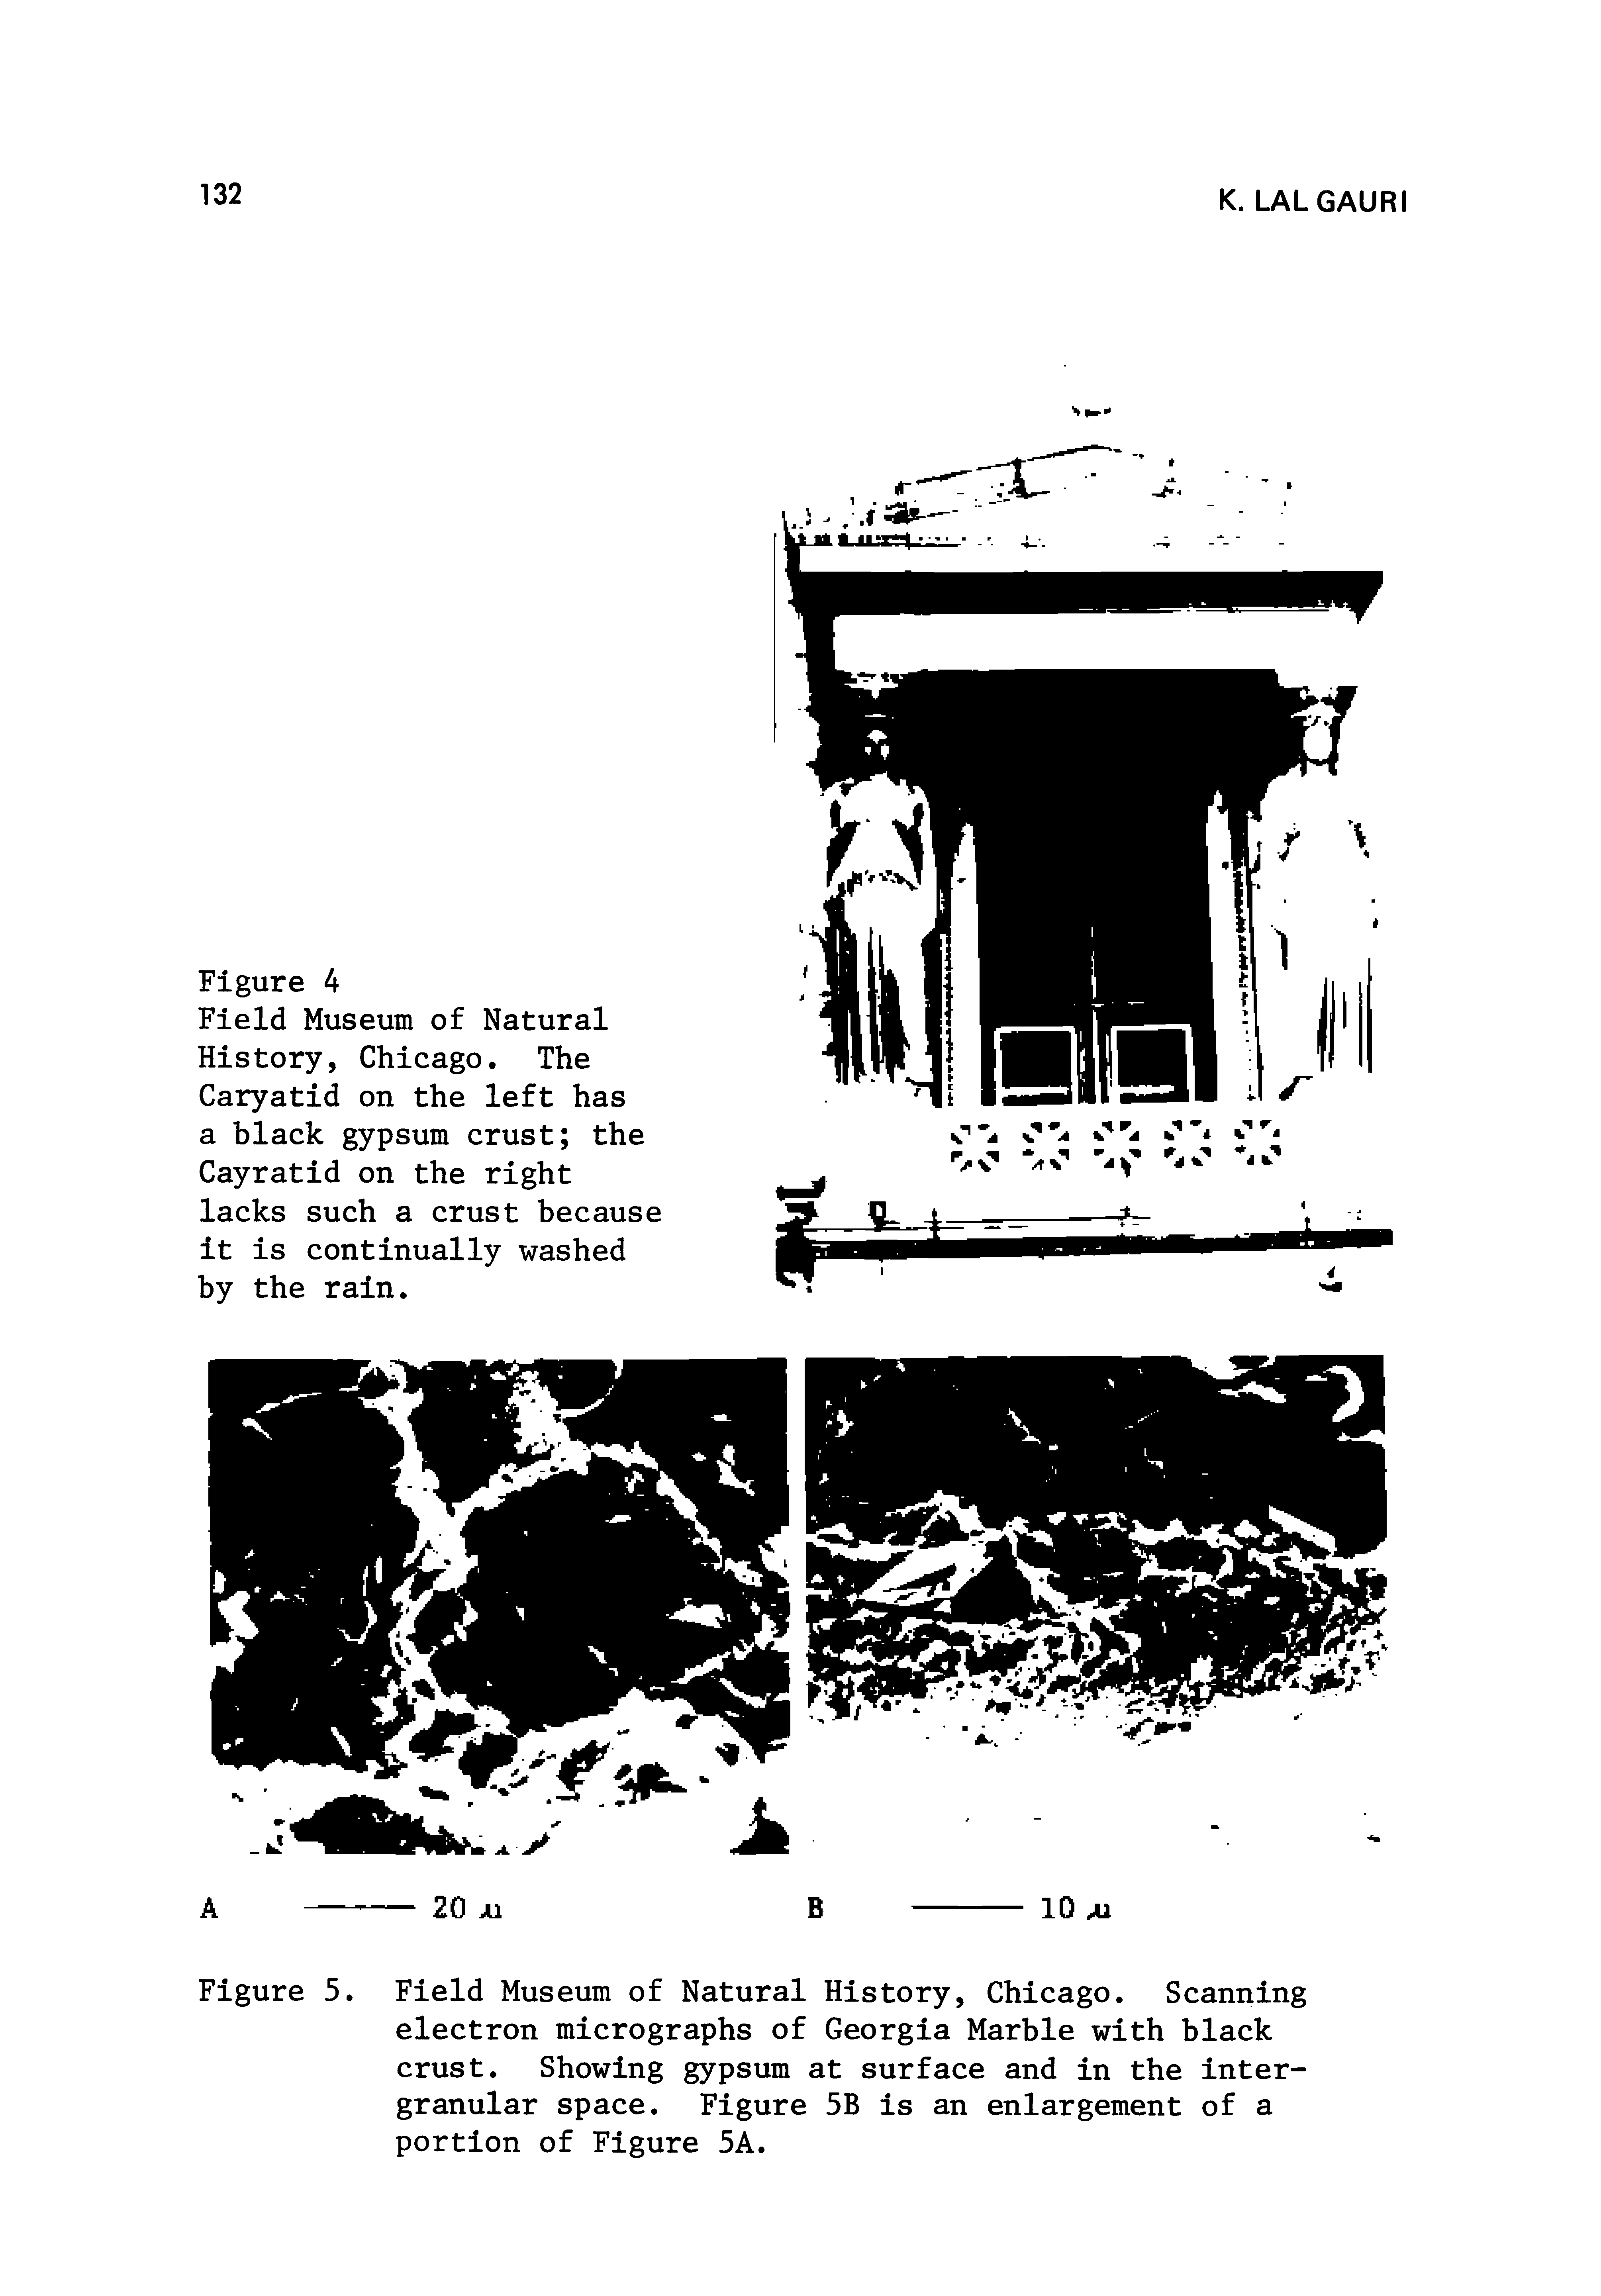 Figure 5. Field Museum of Natural History, Chicago. Scanning electron micrographs of Georgia Marble with black crust. Showing gypsum at surface and in the intergranular space. Figure 5B is an enlargement of a portion of Figure 5A.